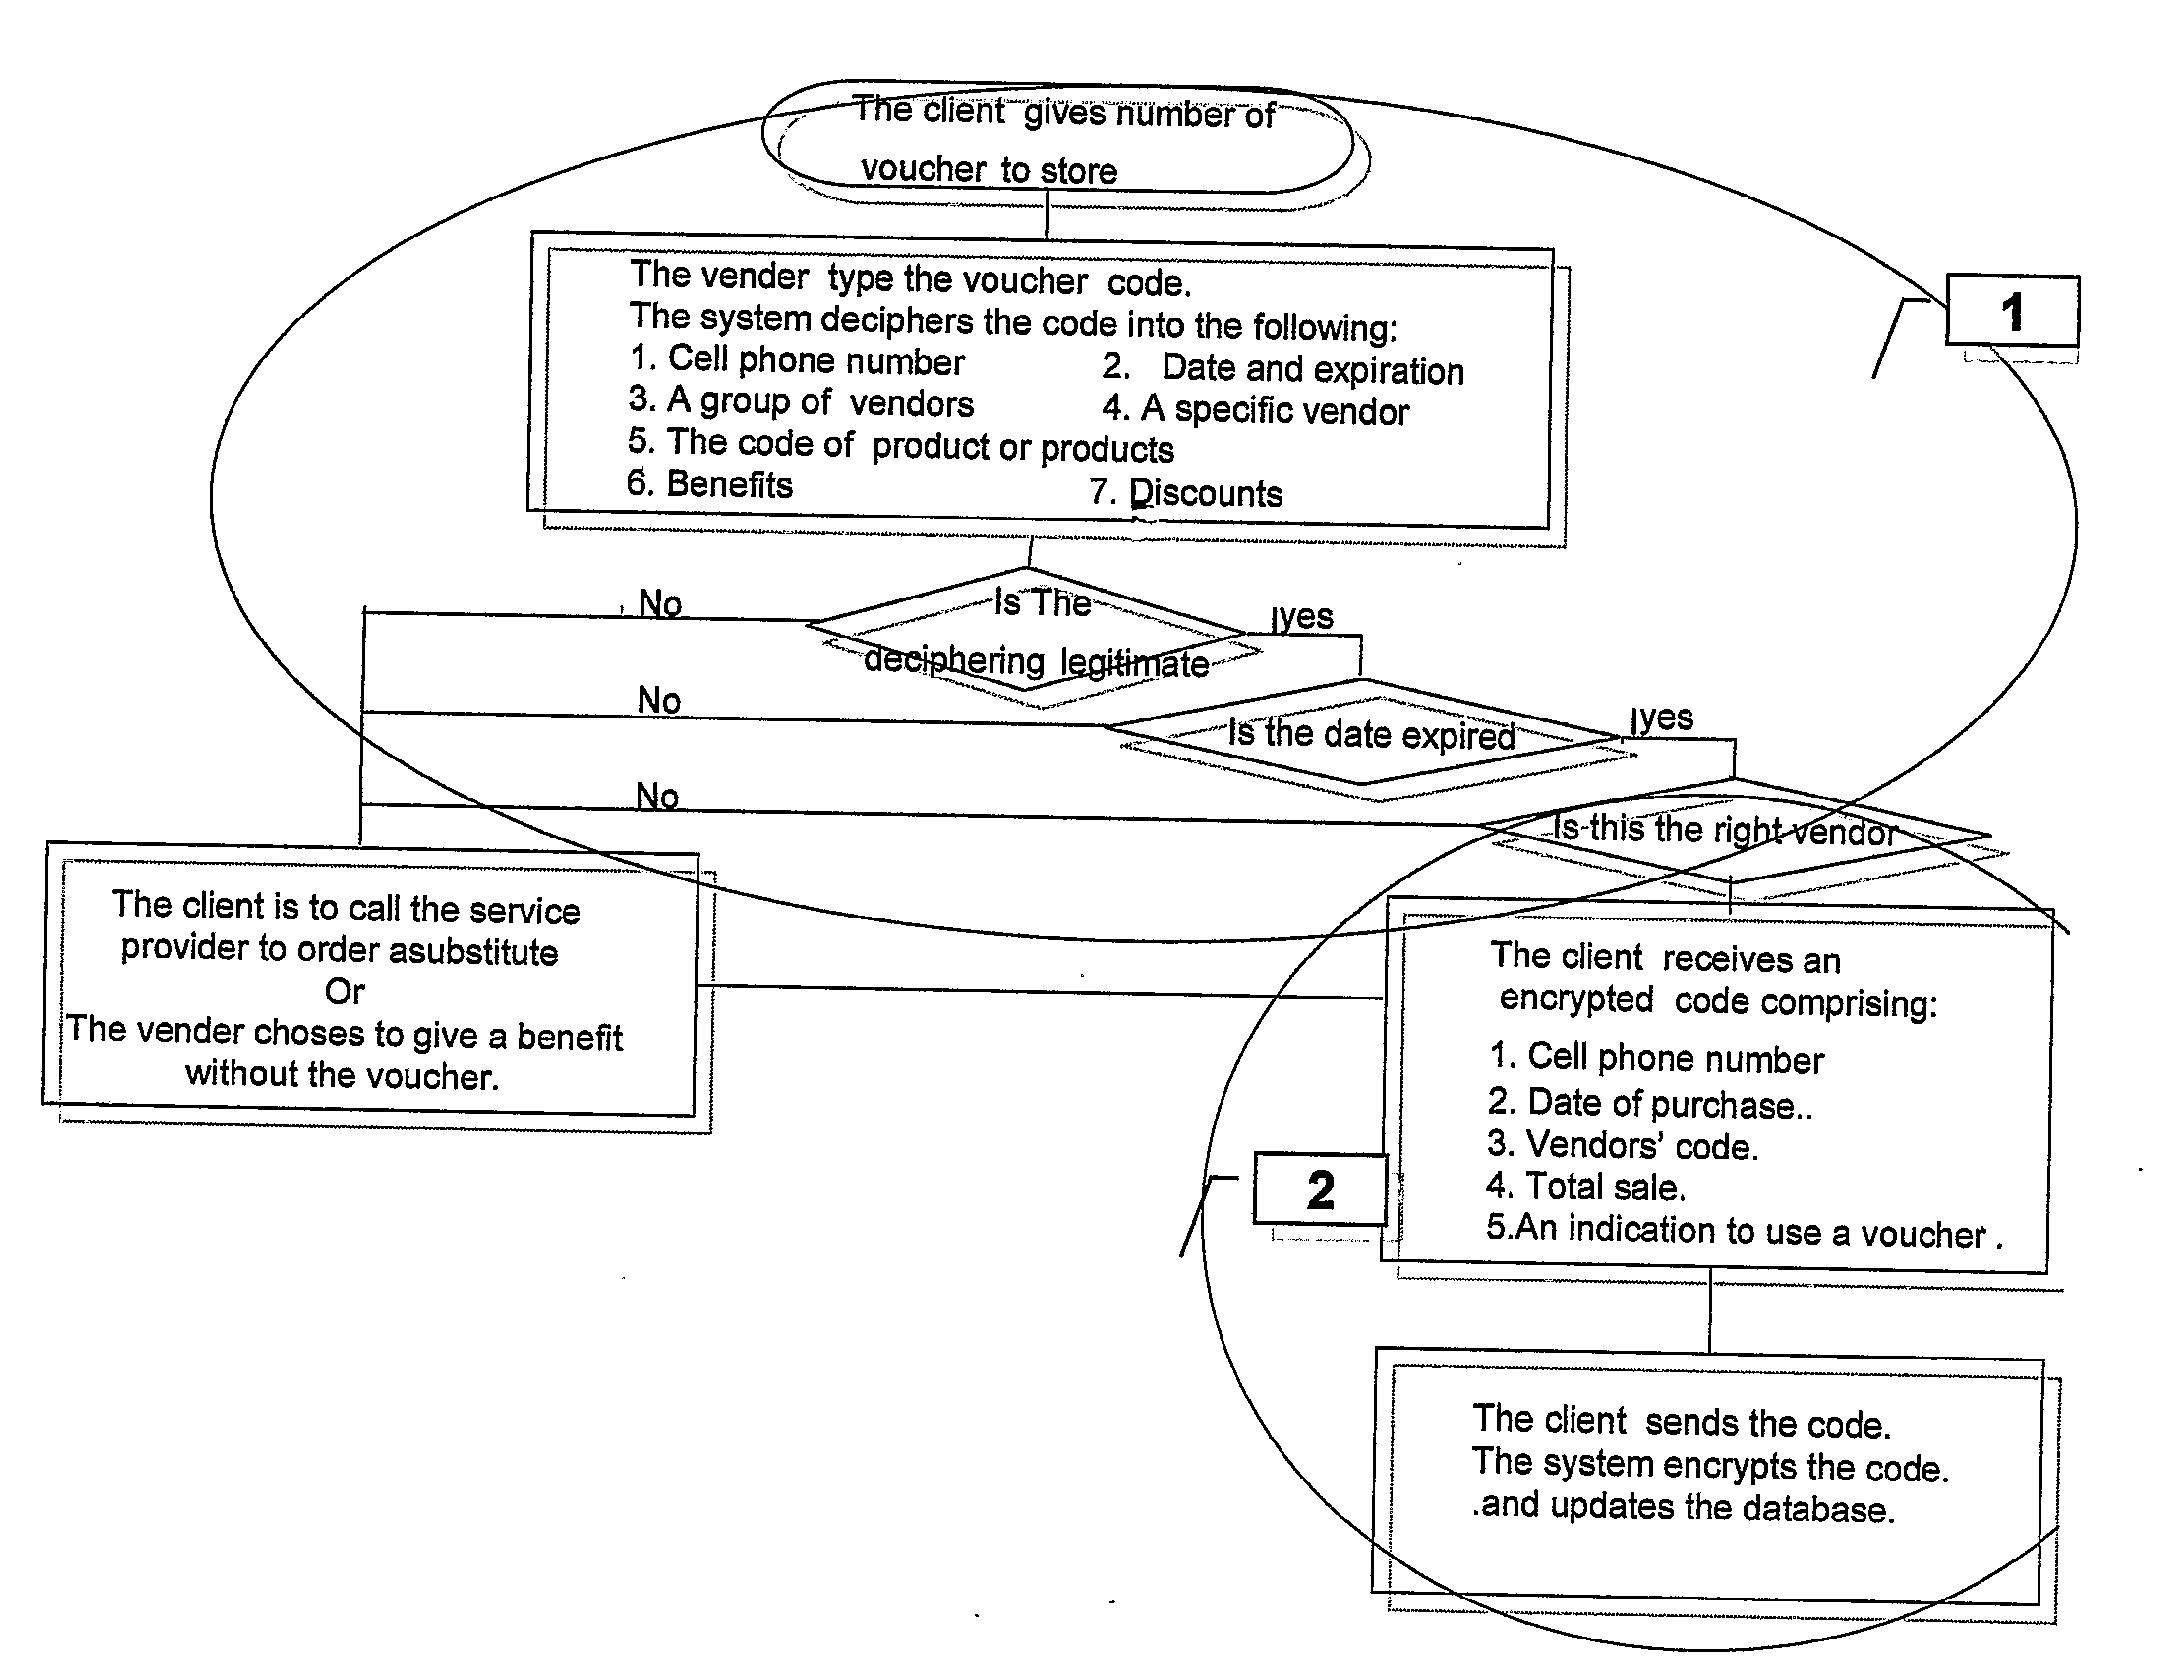 Method and System for Managing Customer Relations